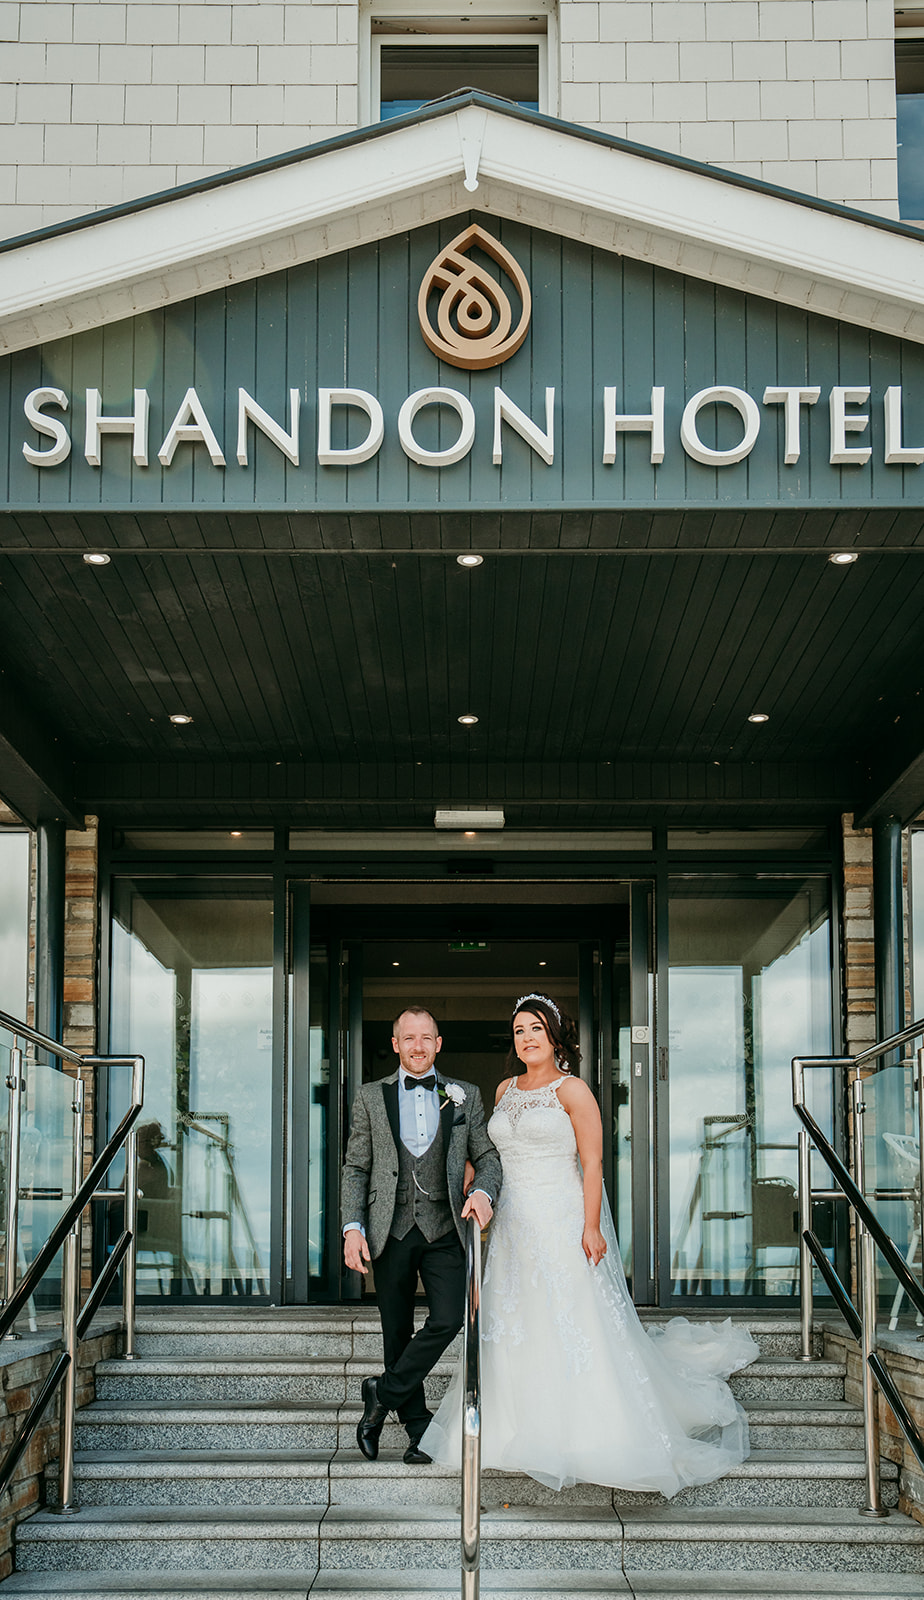 Shandon hotel donegal marble hill with tamara and Colm